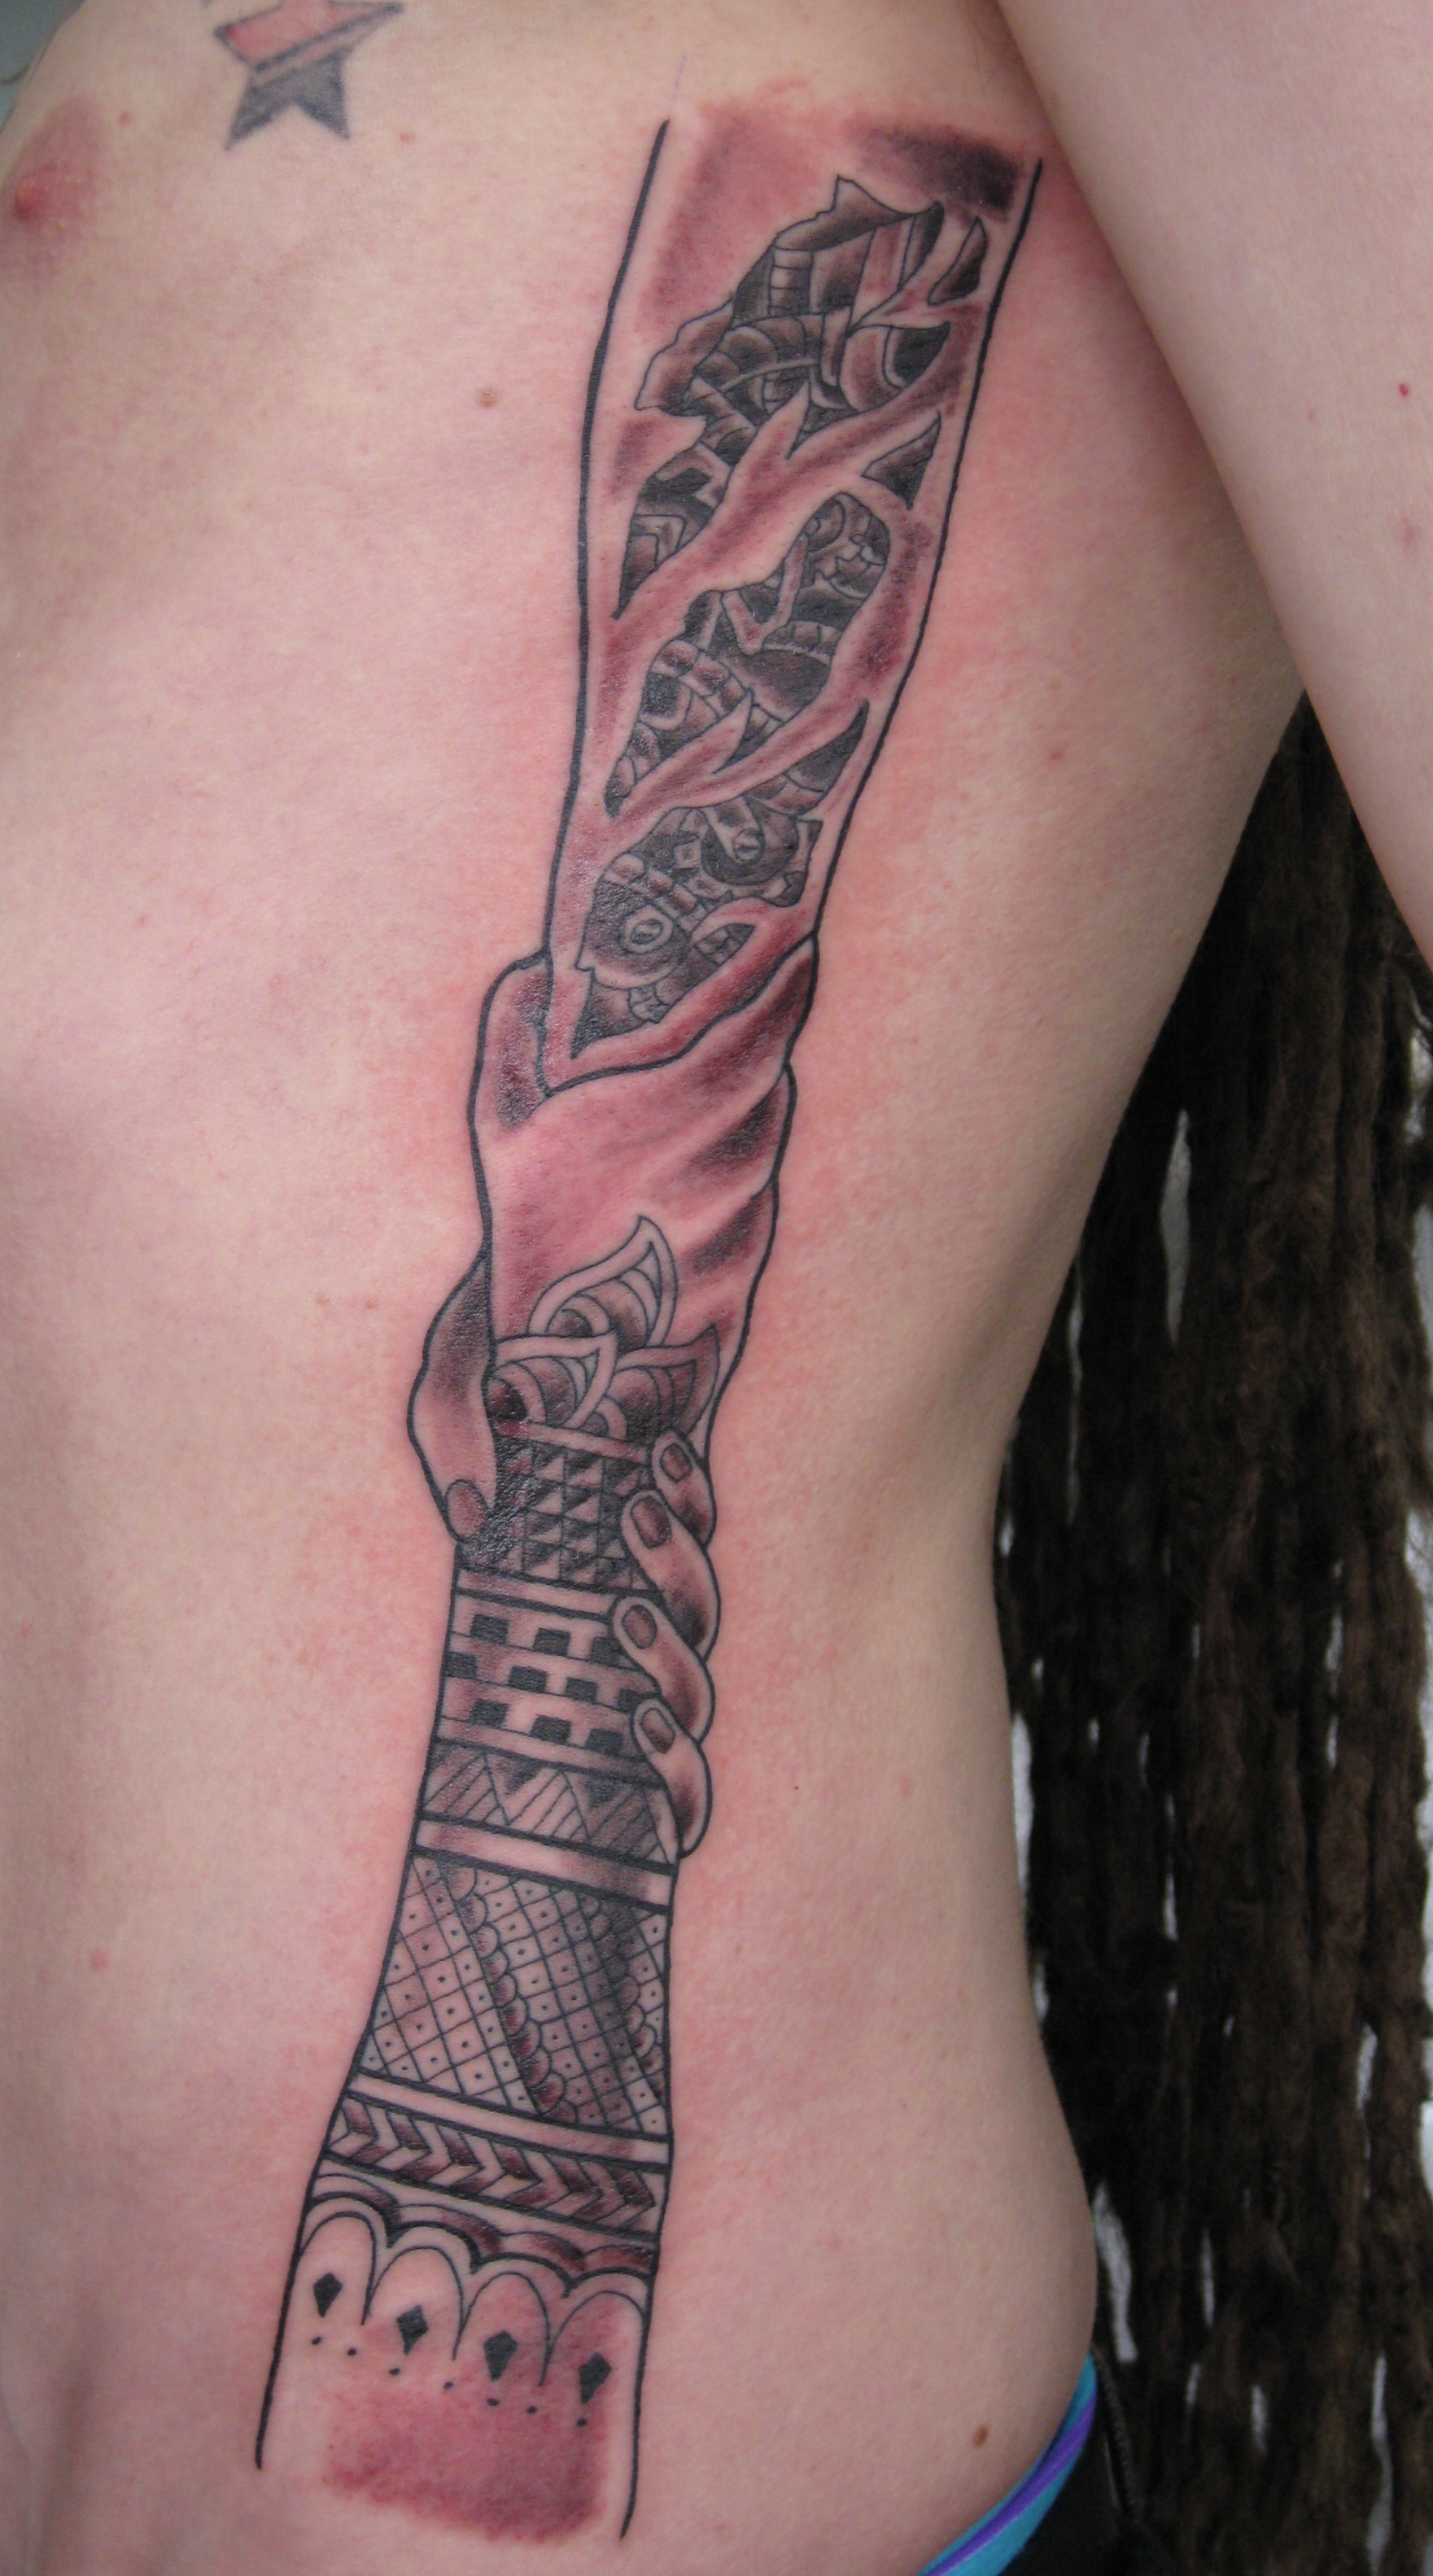 Shaking hands tribal & biomech rib tattoo. Posted in Tattoos with tags bio,